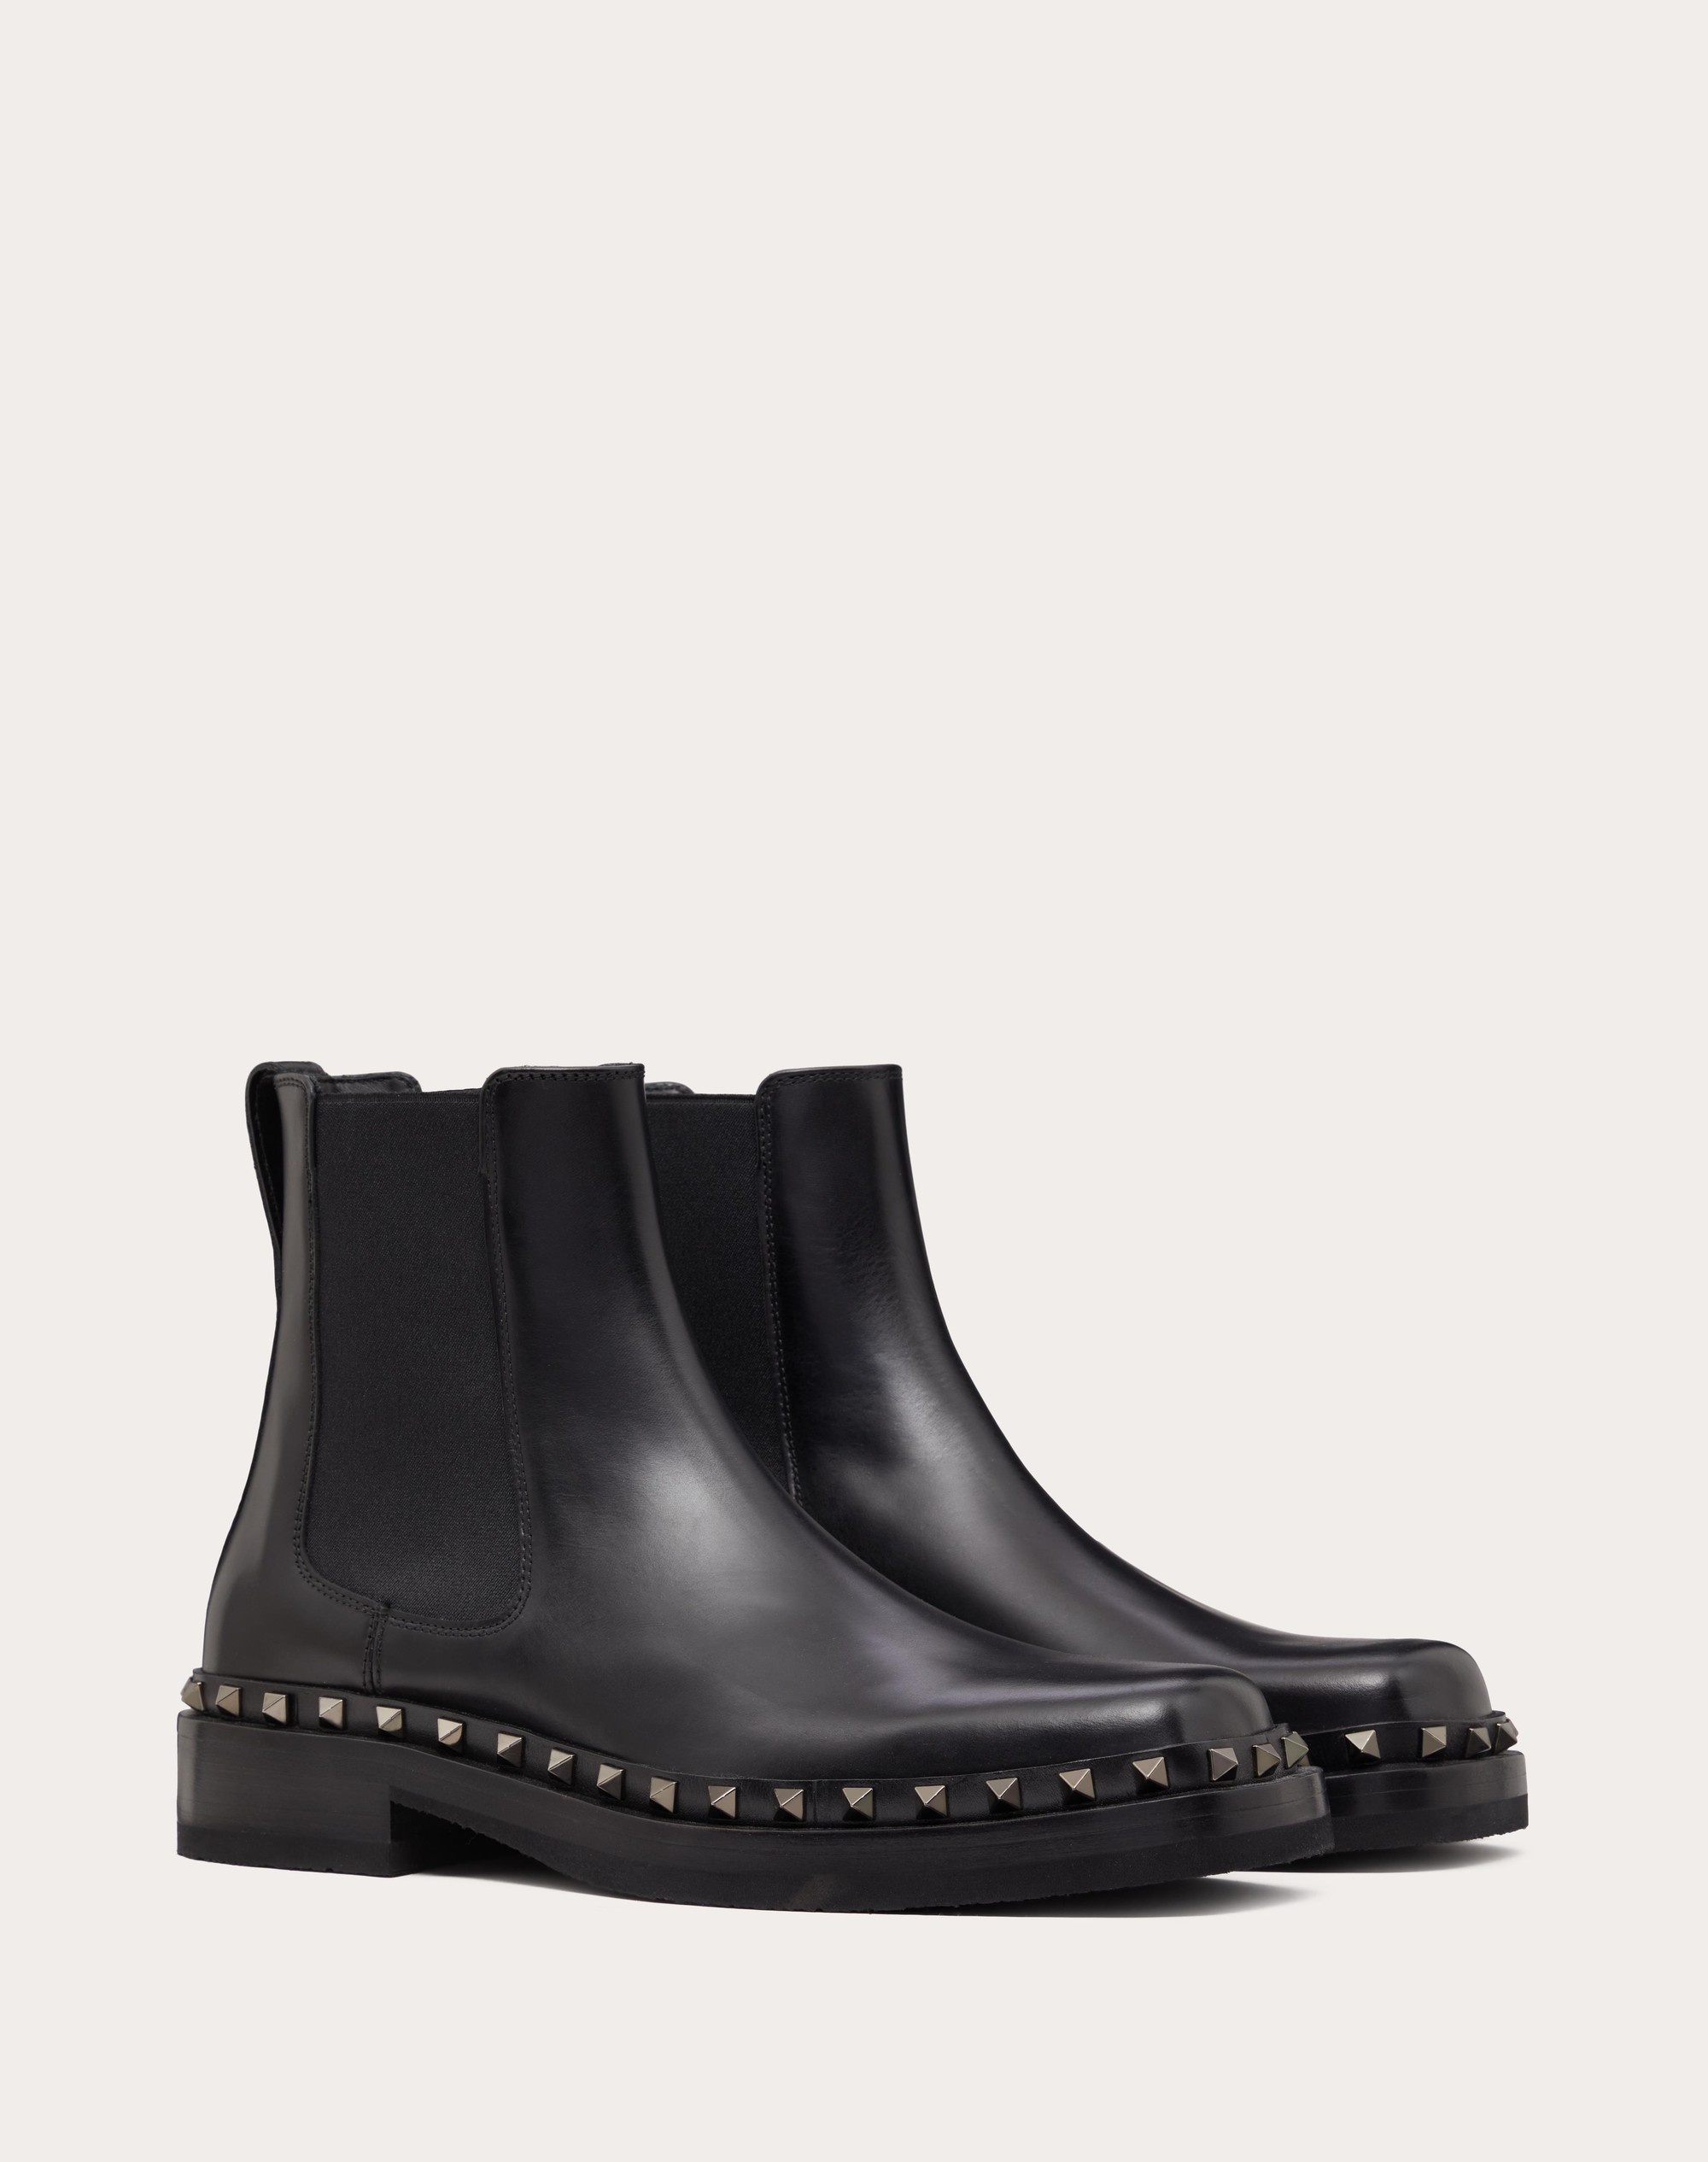 M-WAY ROCKSTUD ANKLE BOOT IN CALFSKIN LEATHER - 2